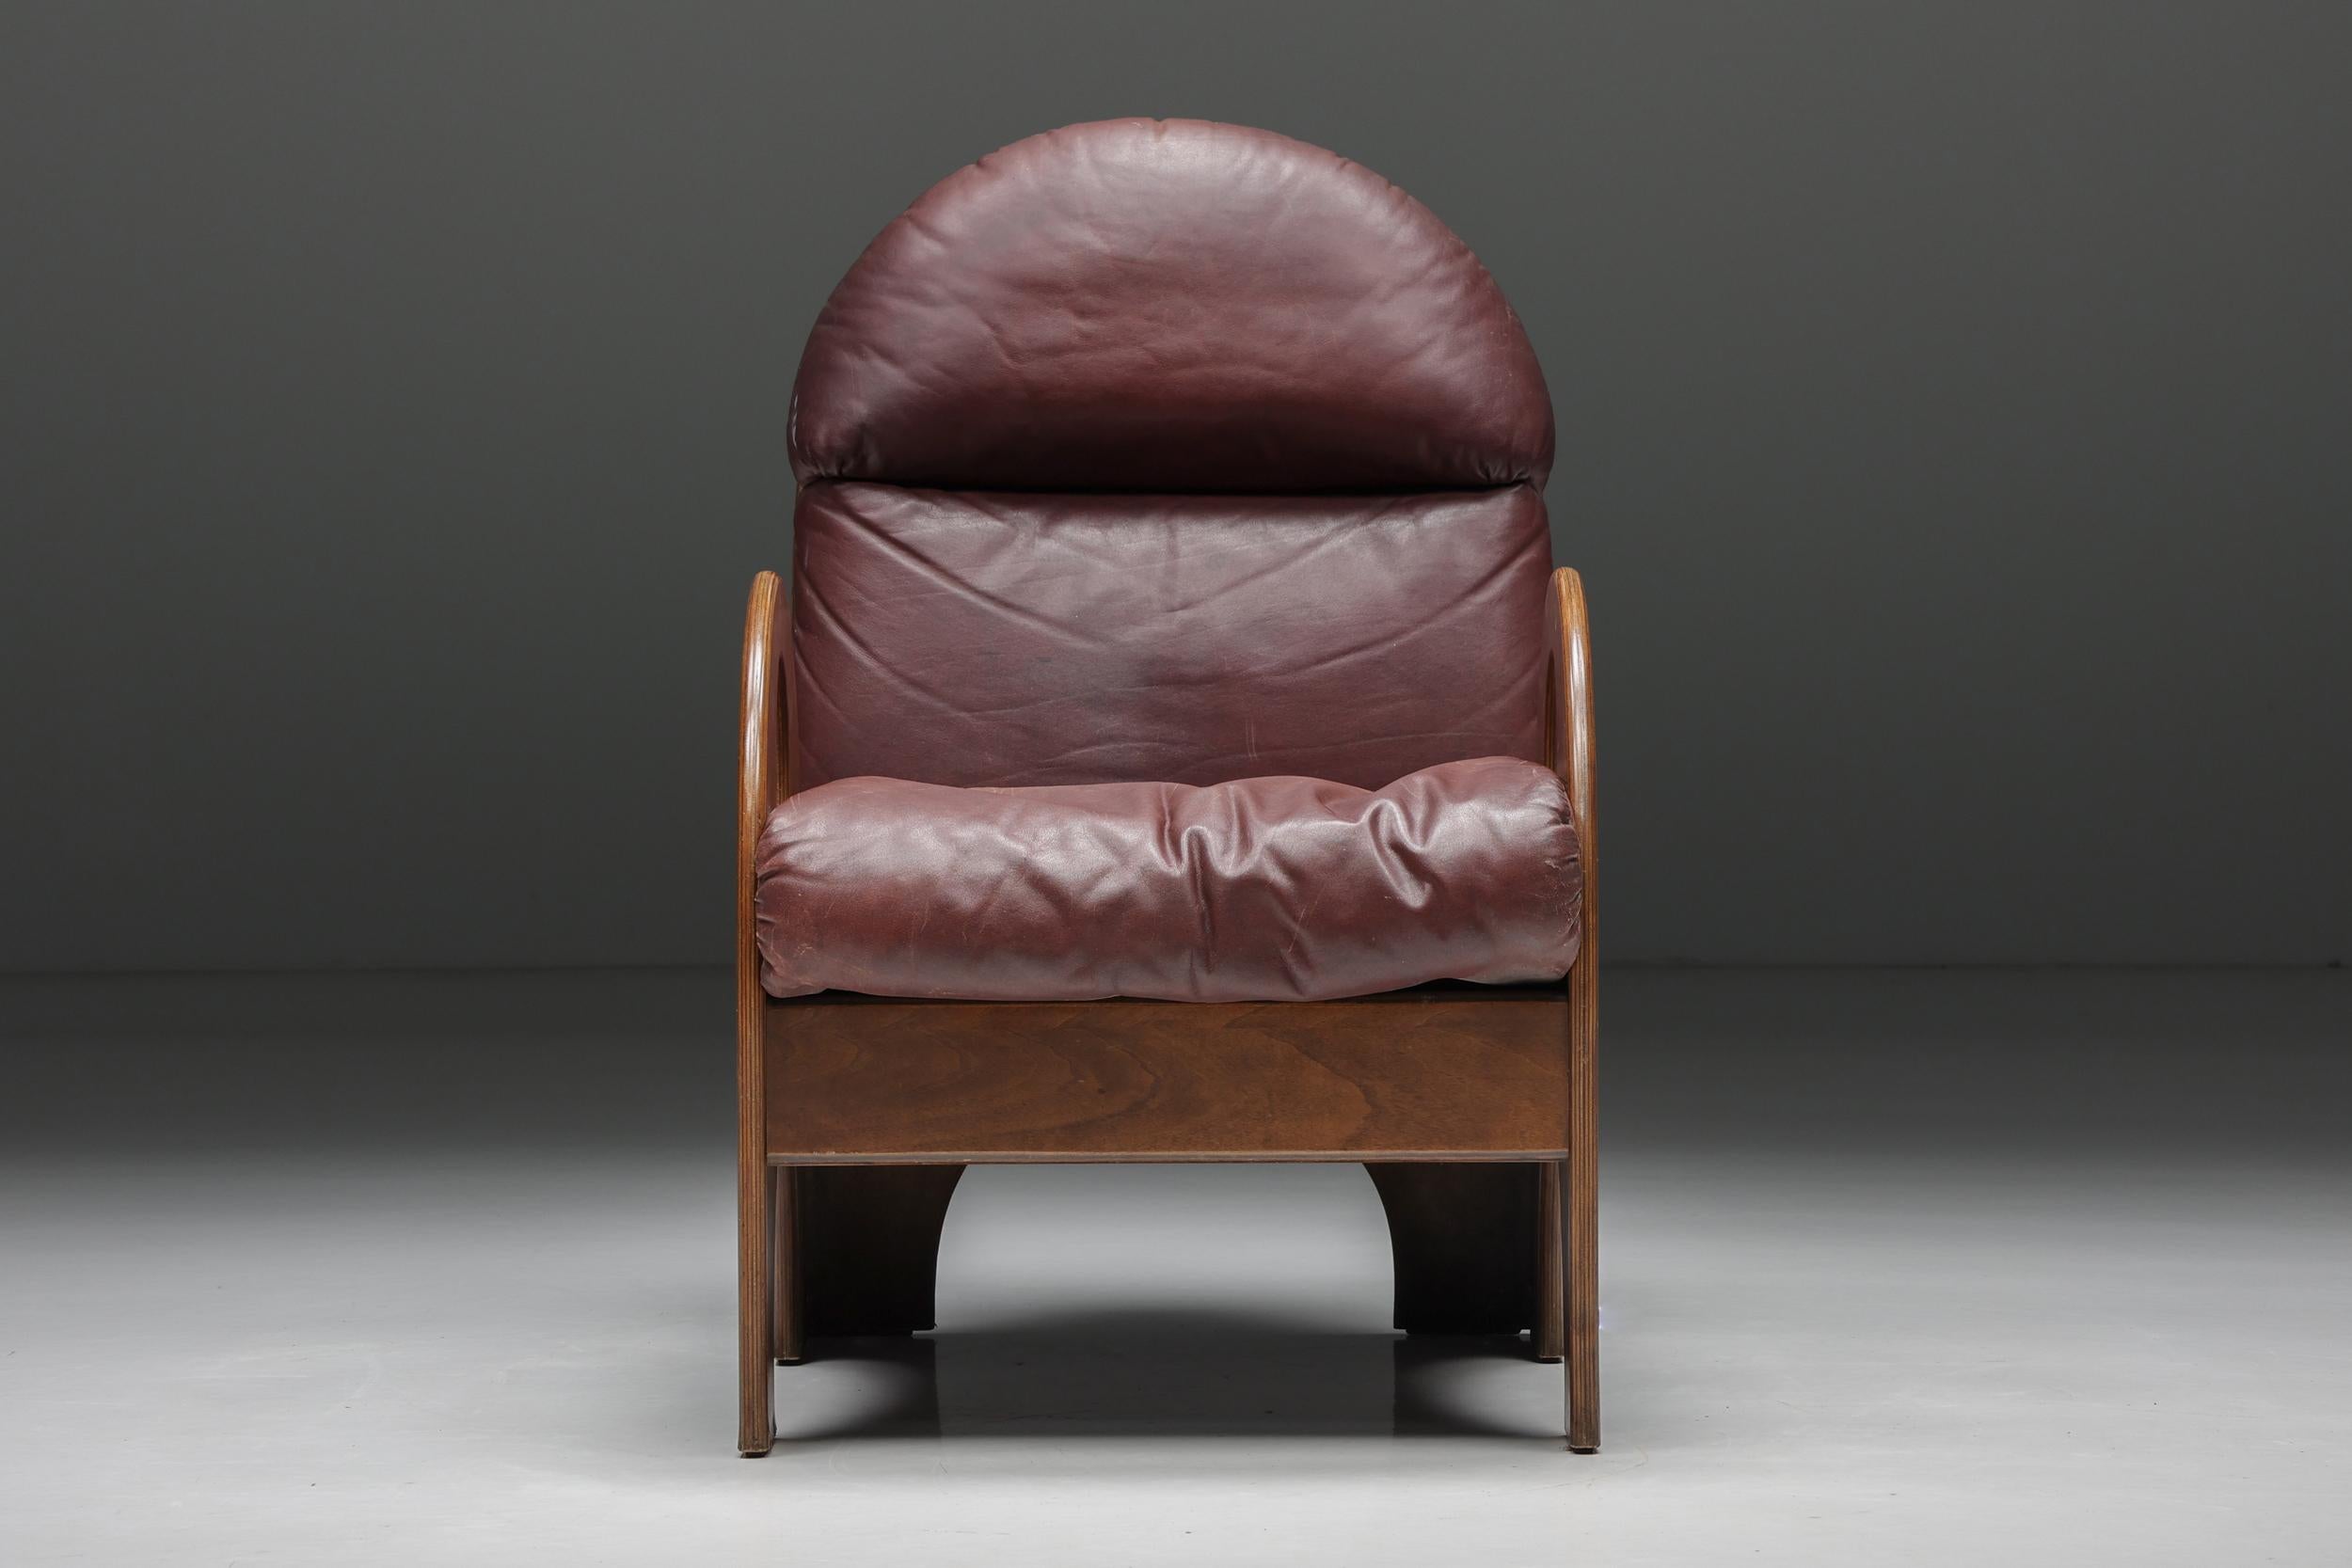 Pair of 'Arcata' Easy Chairs by Gae Aulenti, Walnut and Burgundy Leather, 1968 For Sale 1